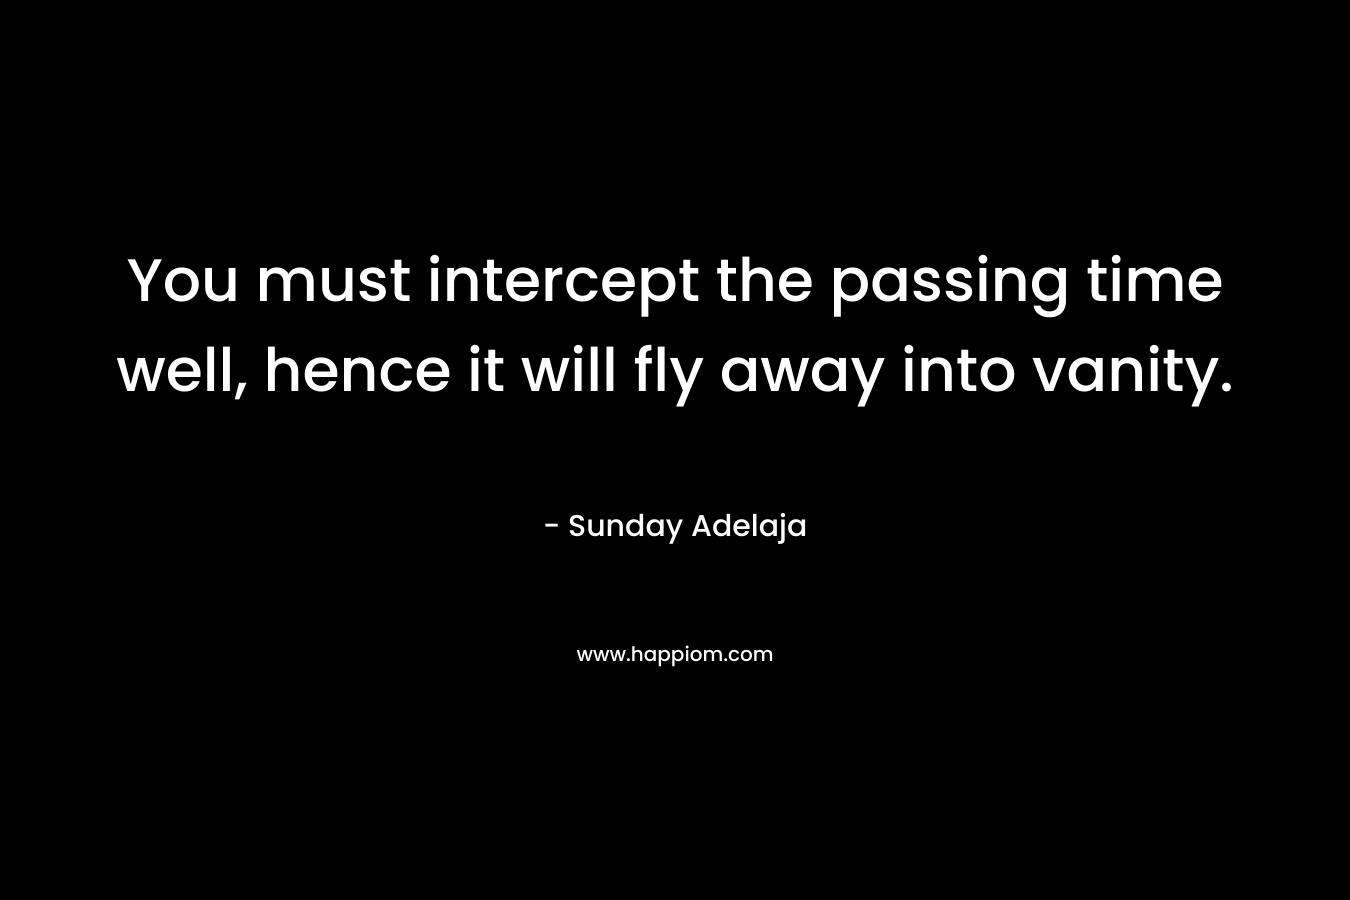 You must intercept the passing time well, hence it will fly away into vanity.